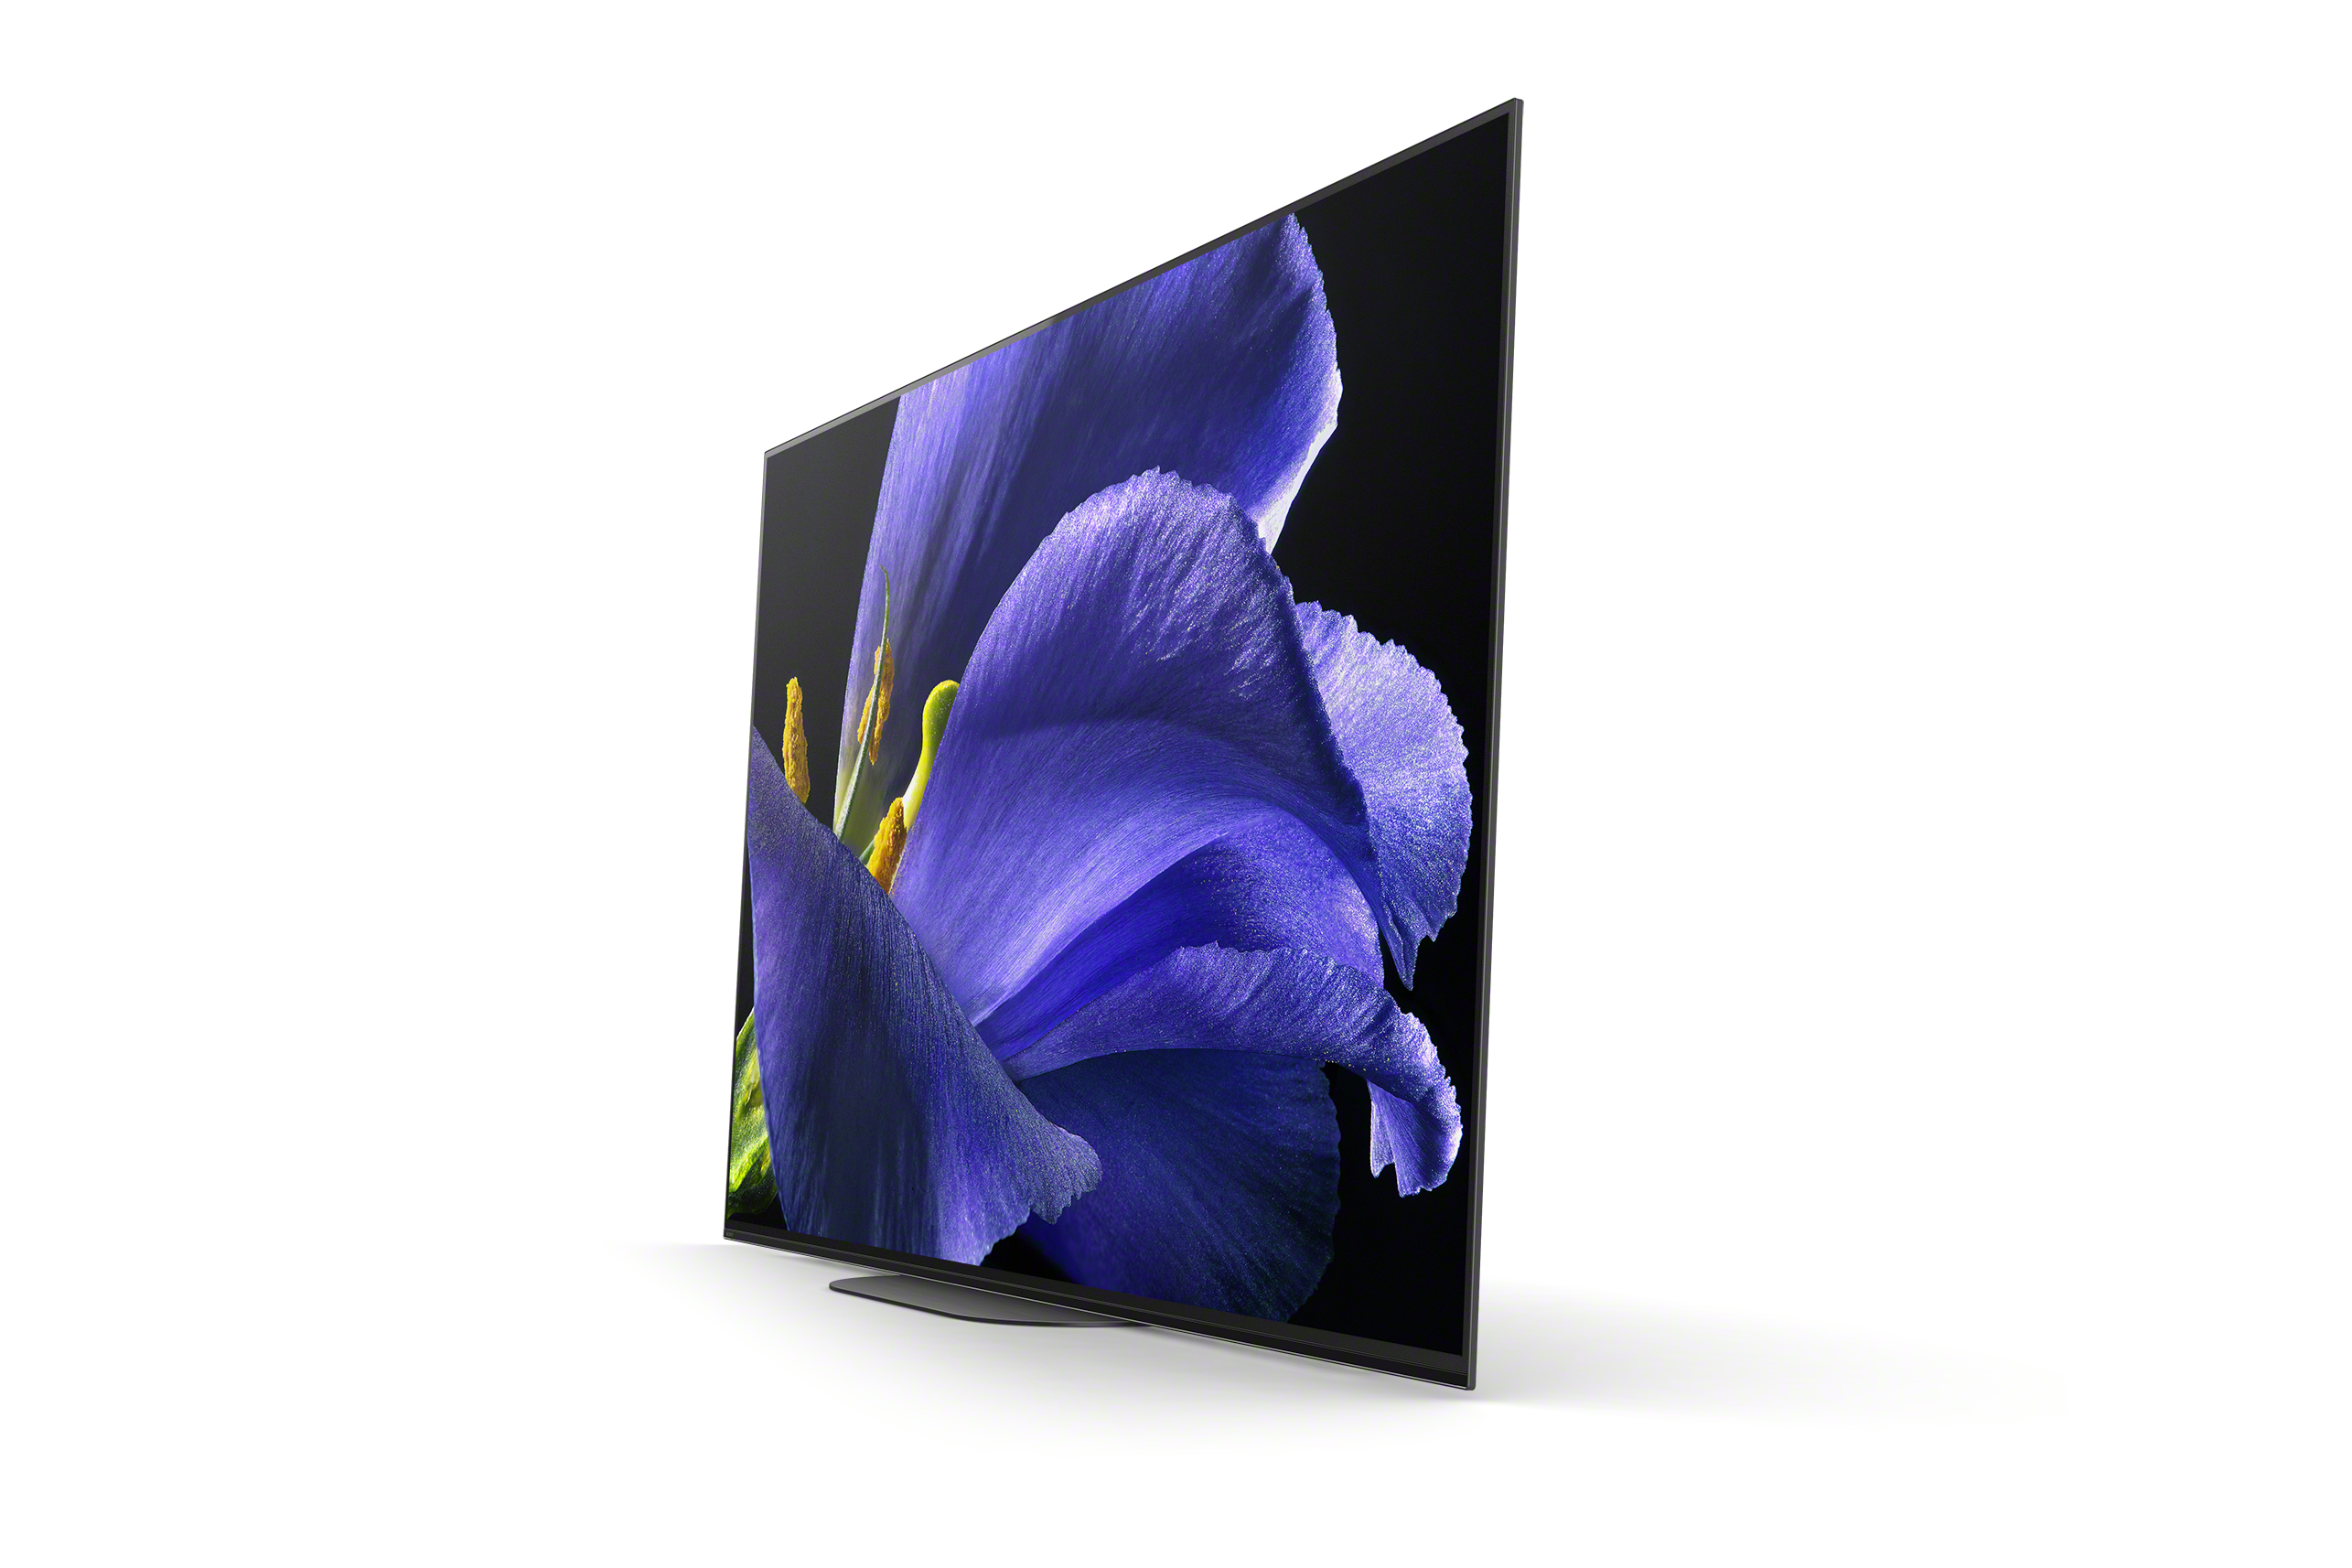 Sony 55" Class XBR55A9G 4K UHD OLED Android Smart TV HDR BRAVIA A9G Series - image 22 of 24